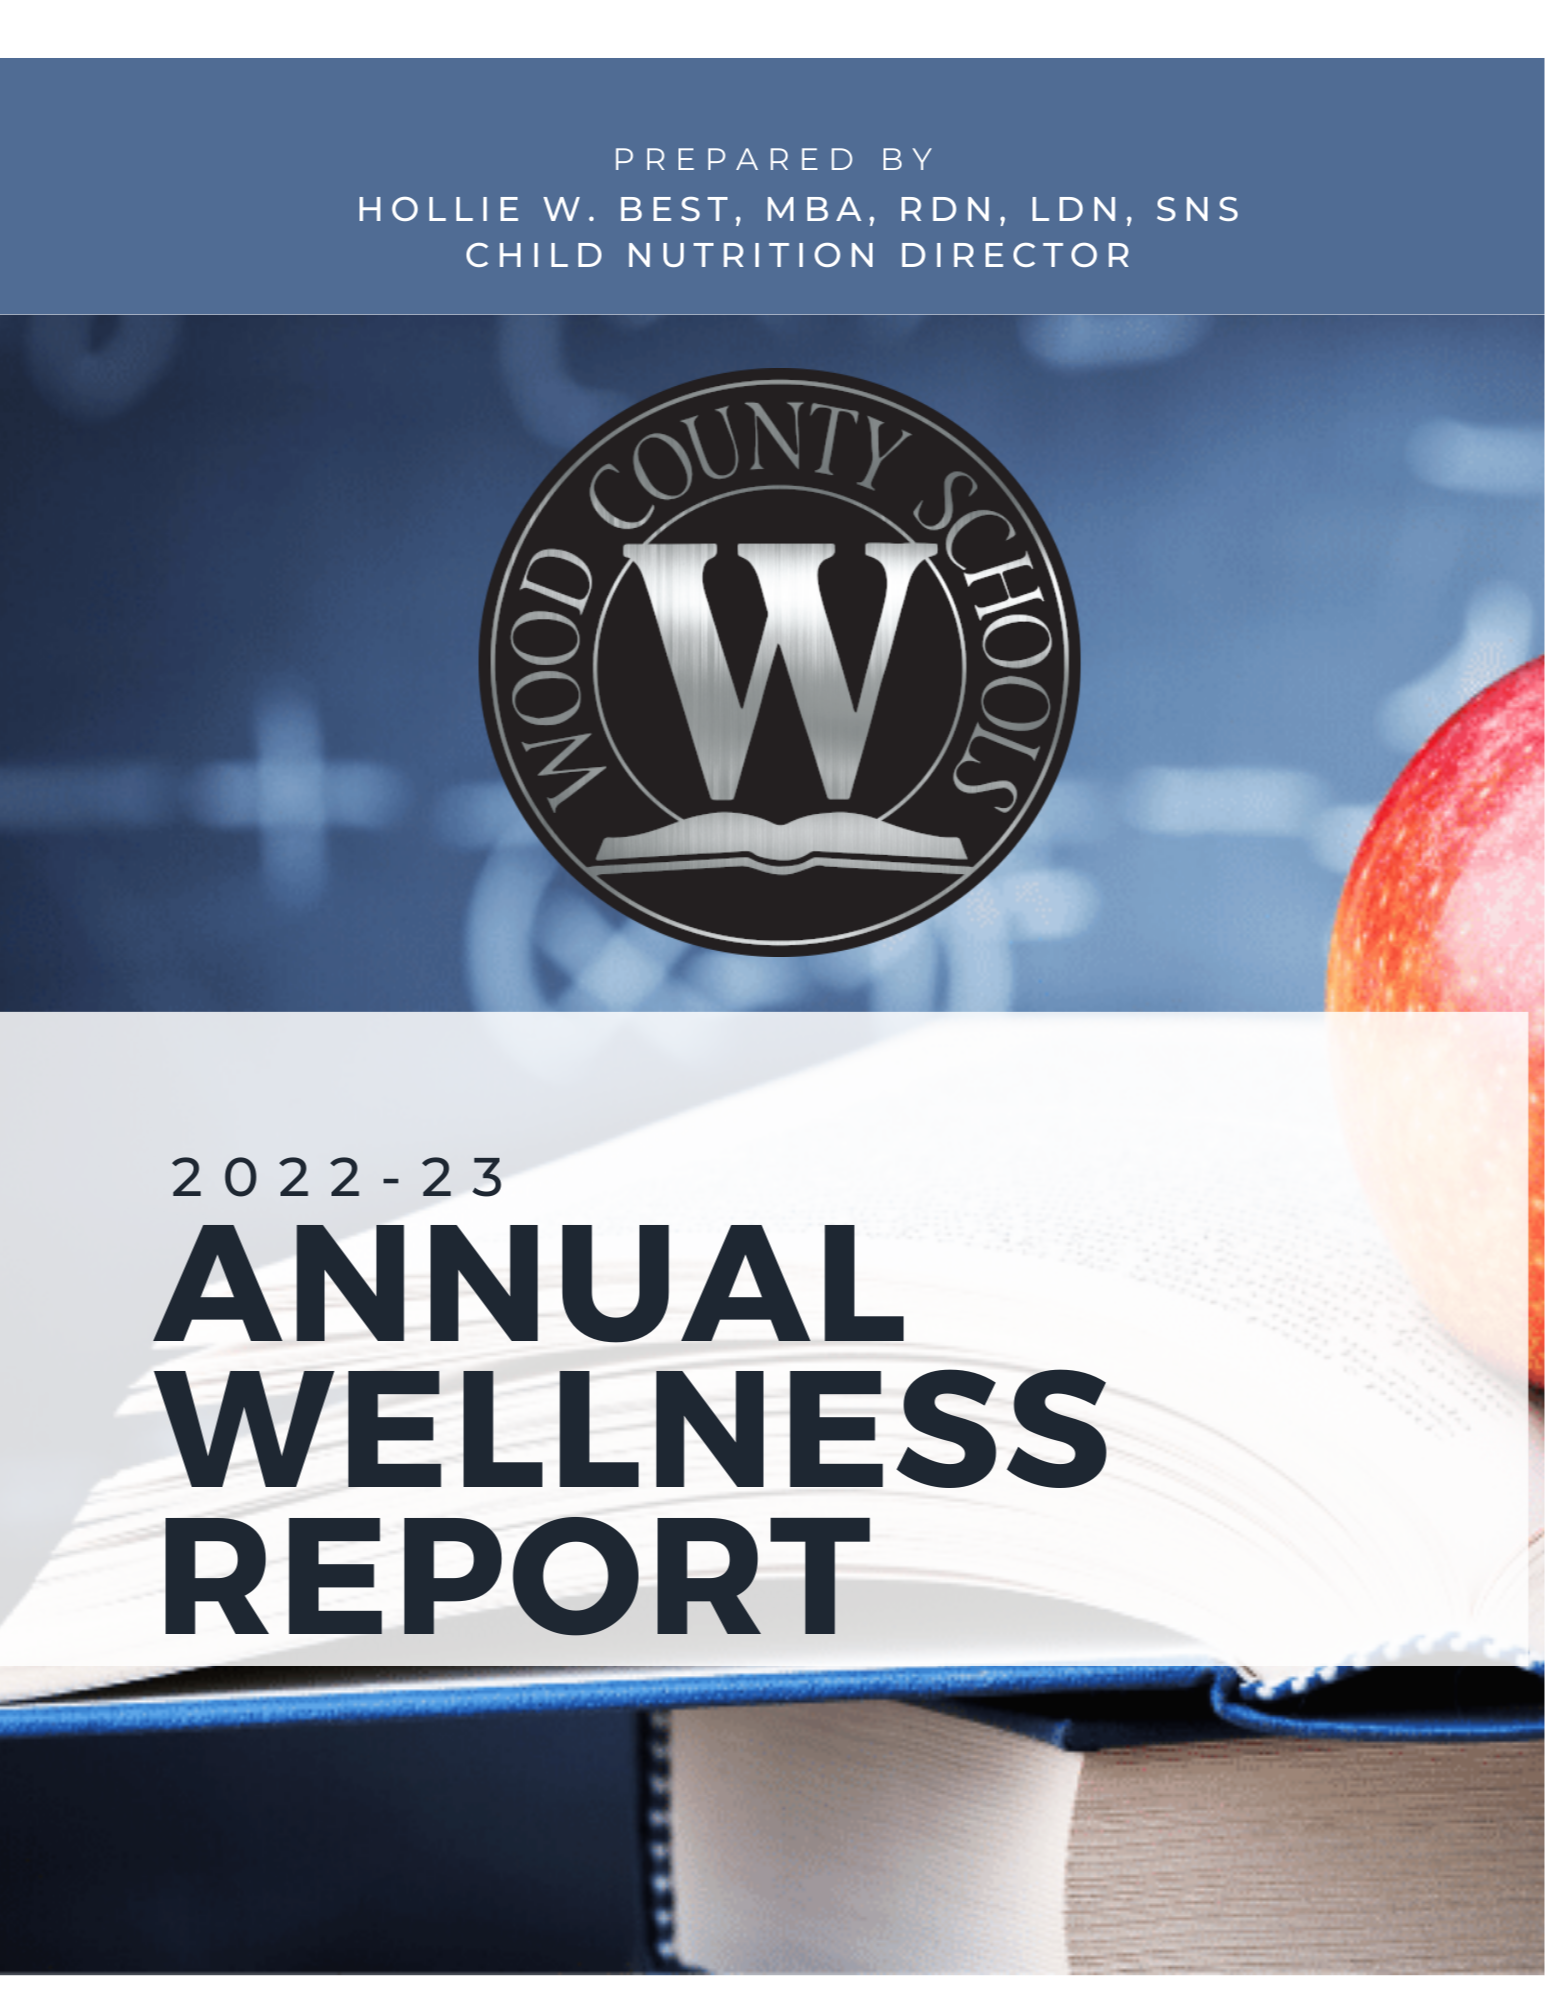 School Wellness Front Page